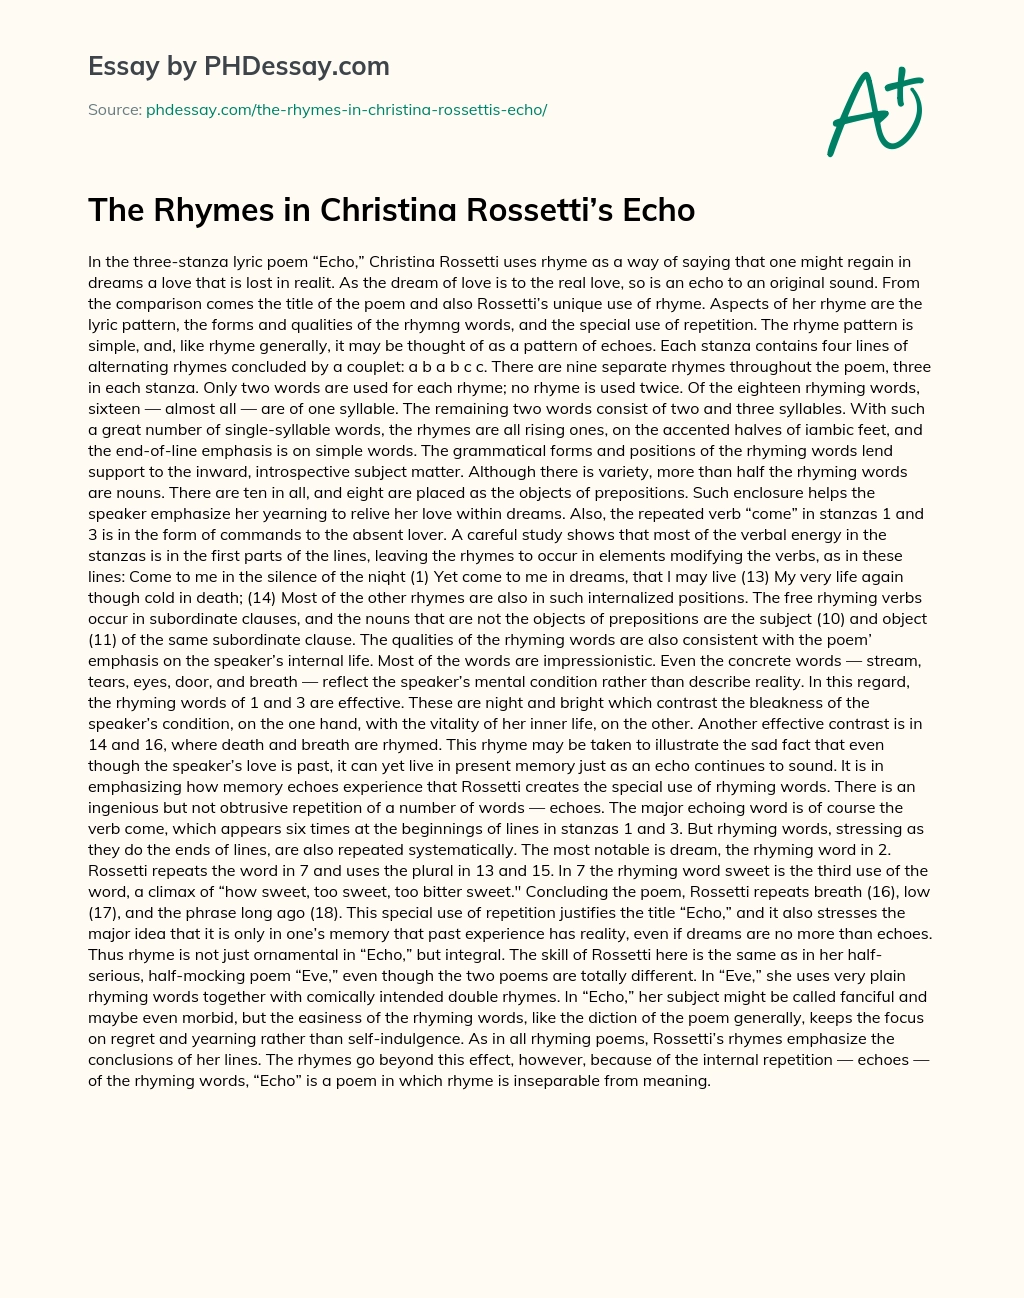 The Rhymes in Christina Rossetti’s Echo essay